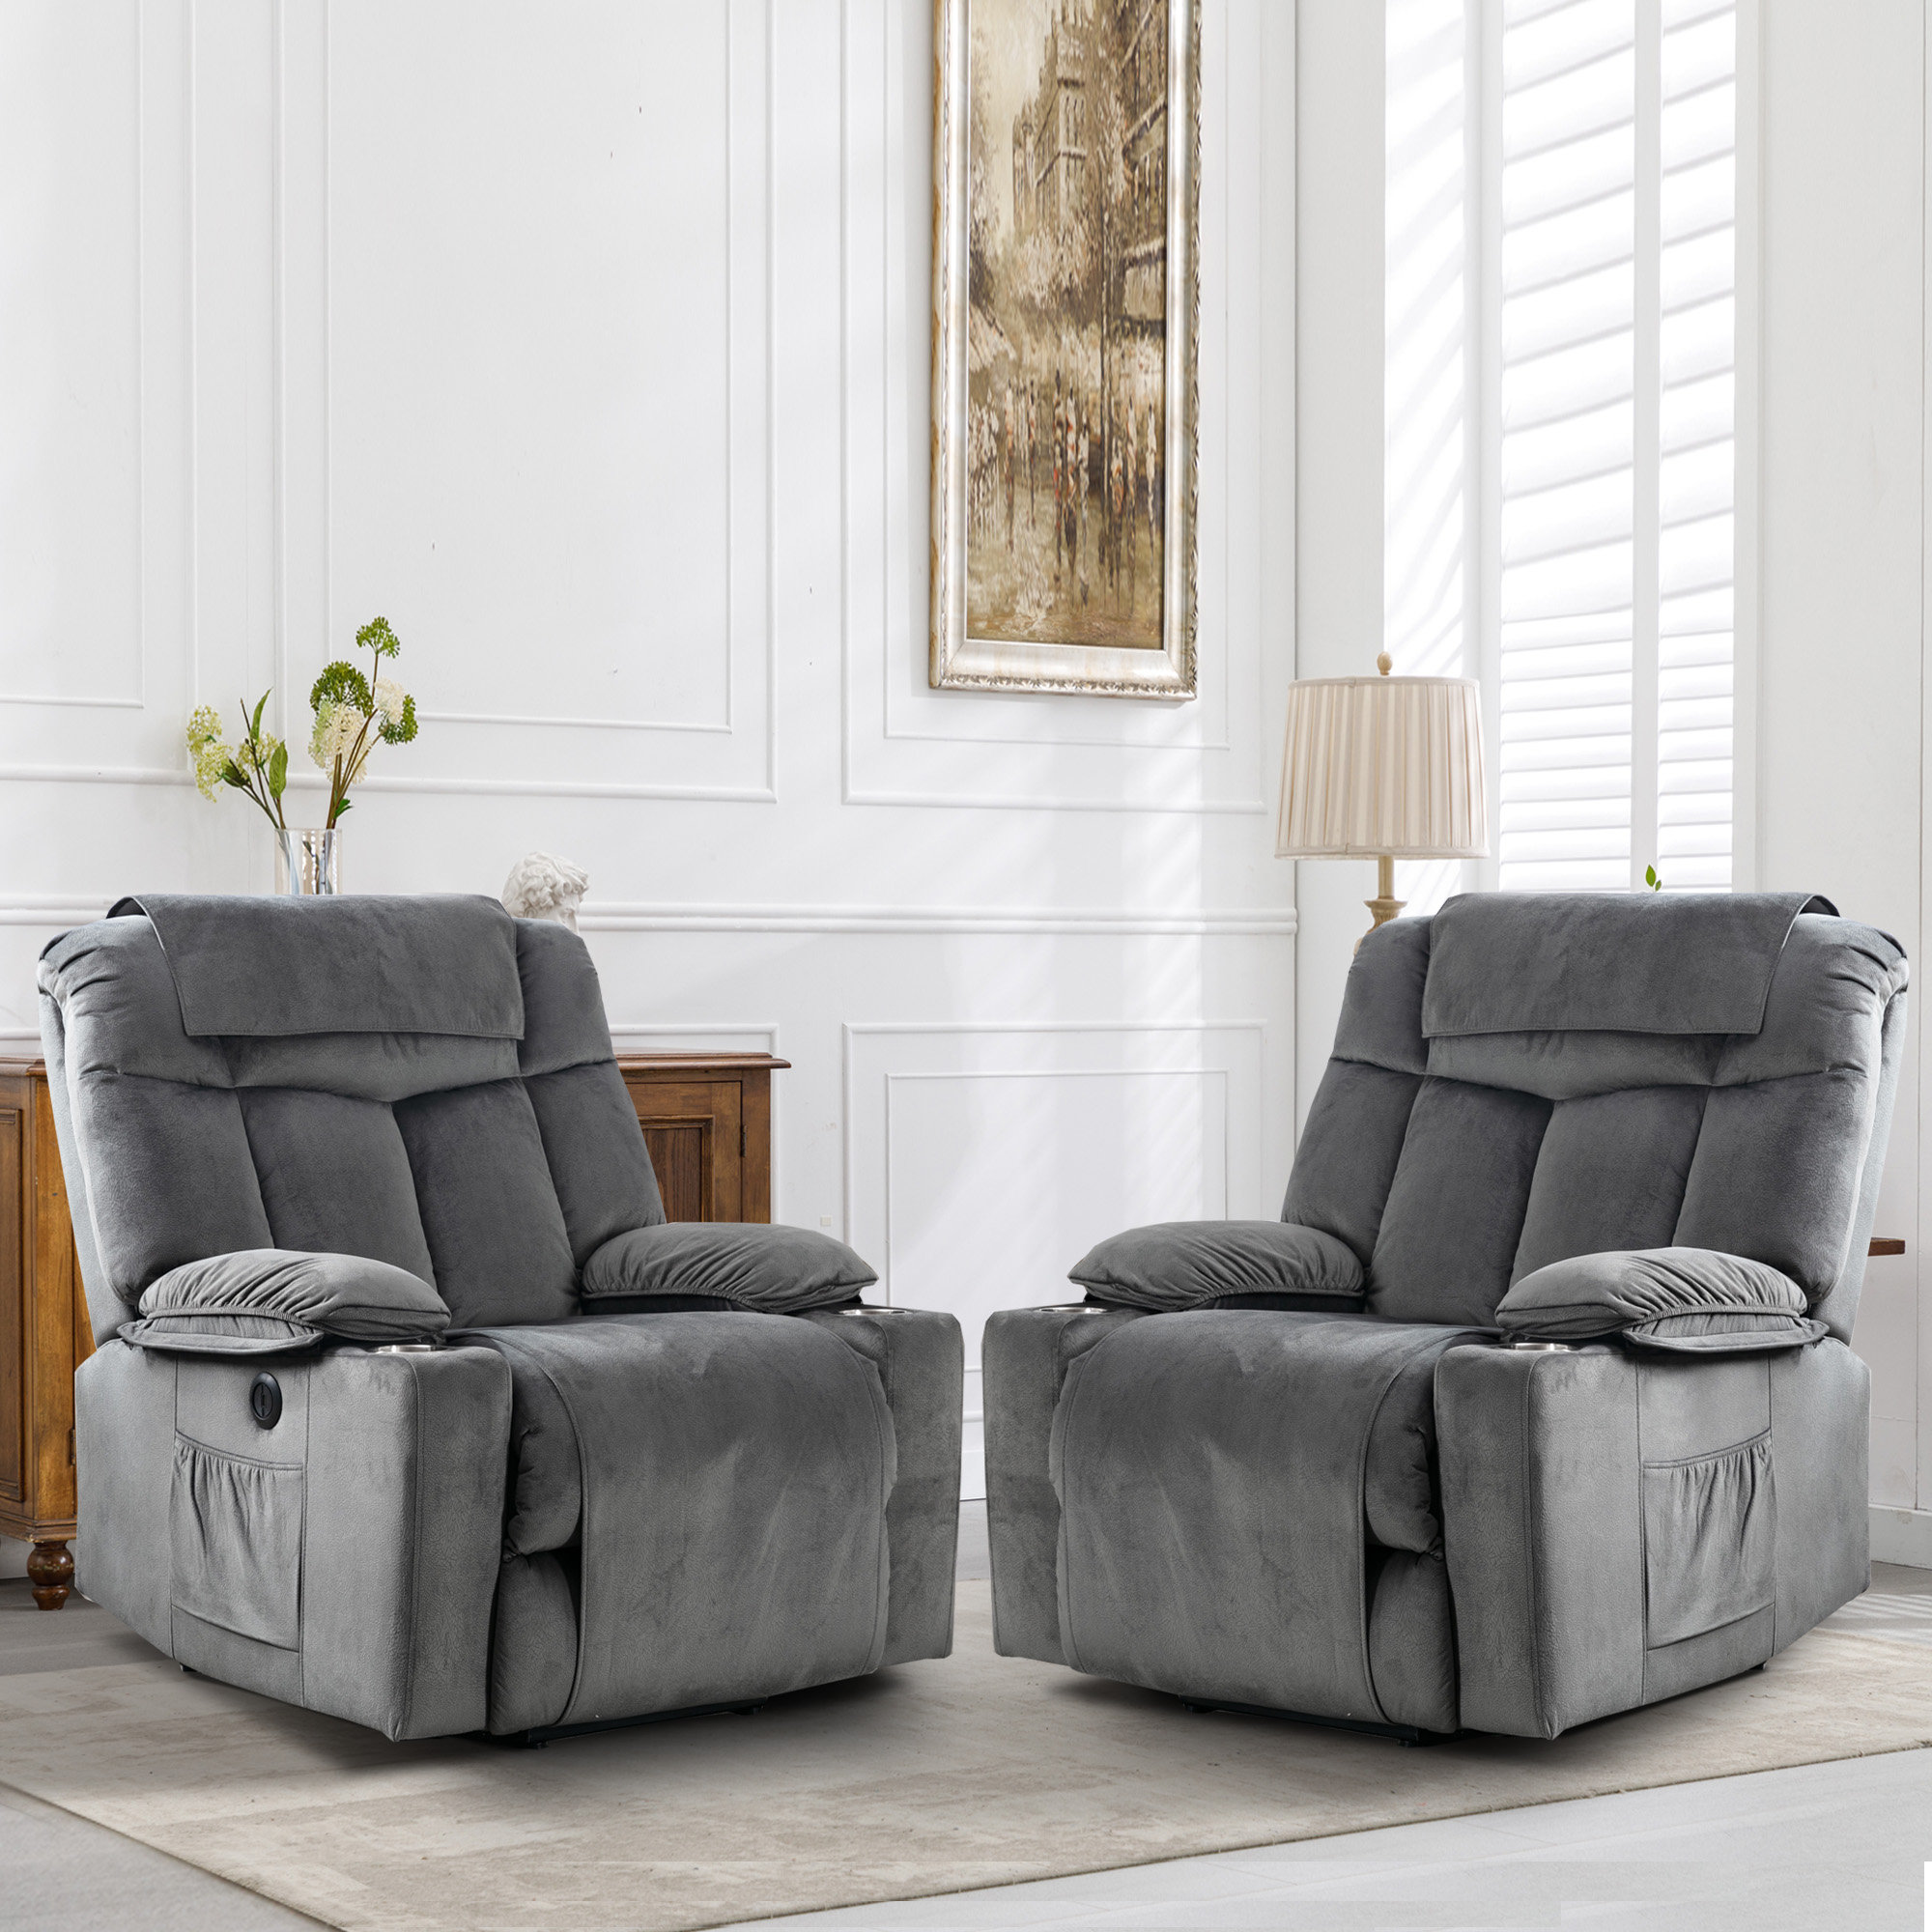 Carollyn 34.6 Wide Super Soft Upholstered Lift Assist Power Recliner with  USB Port